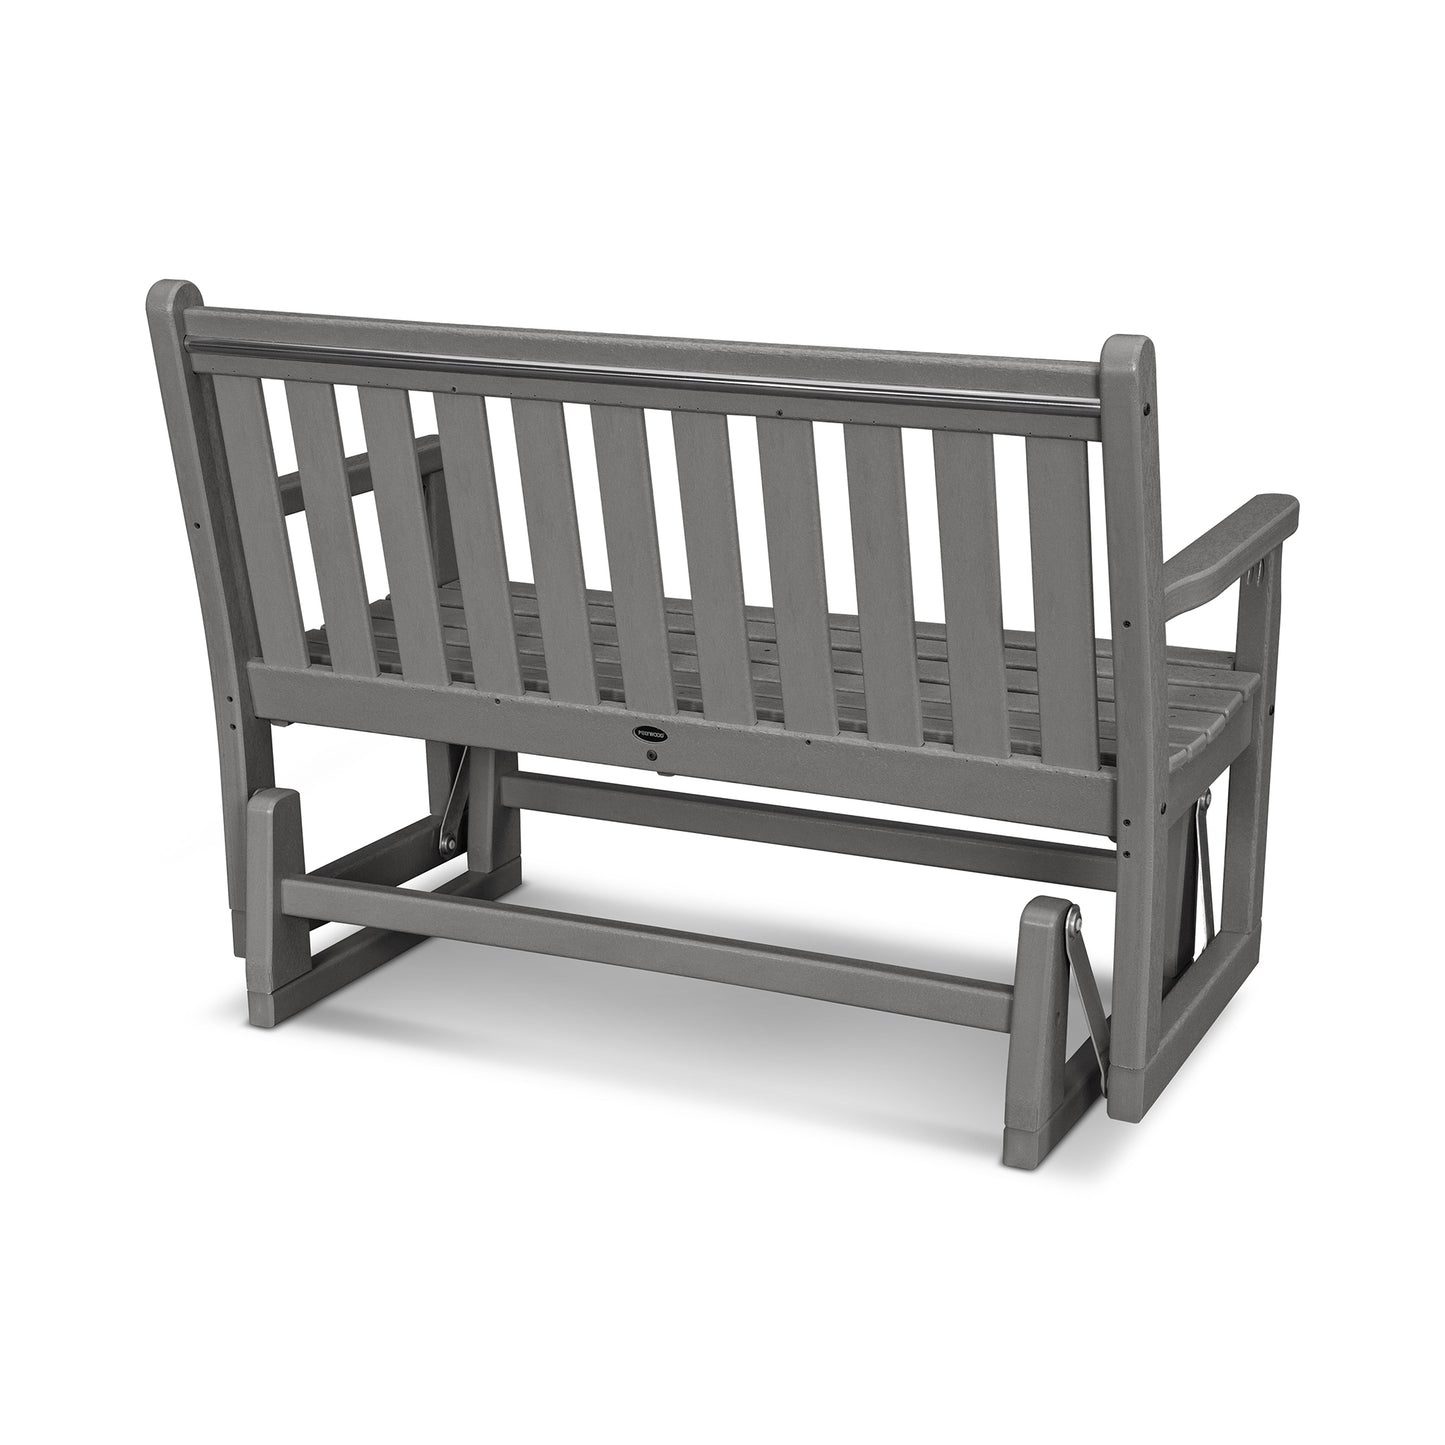 A gray POLYWOOD® Traditional Garden 48" Glider Bench with vertical slat backrest and solid armrests, depicted against a plain white background. The swing includes metal chains for hanging.